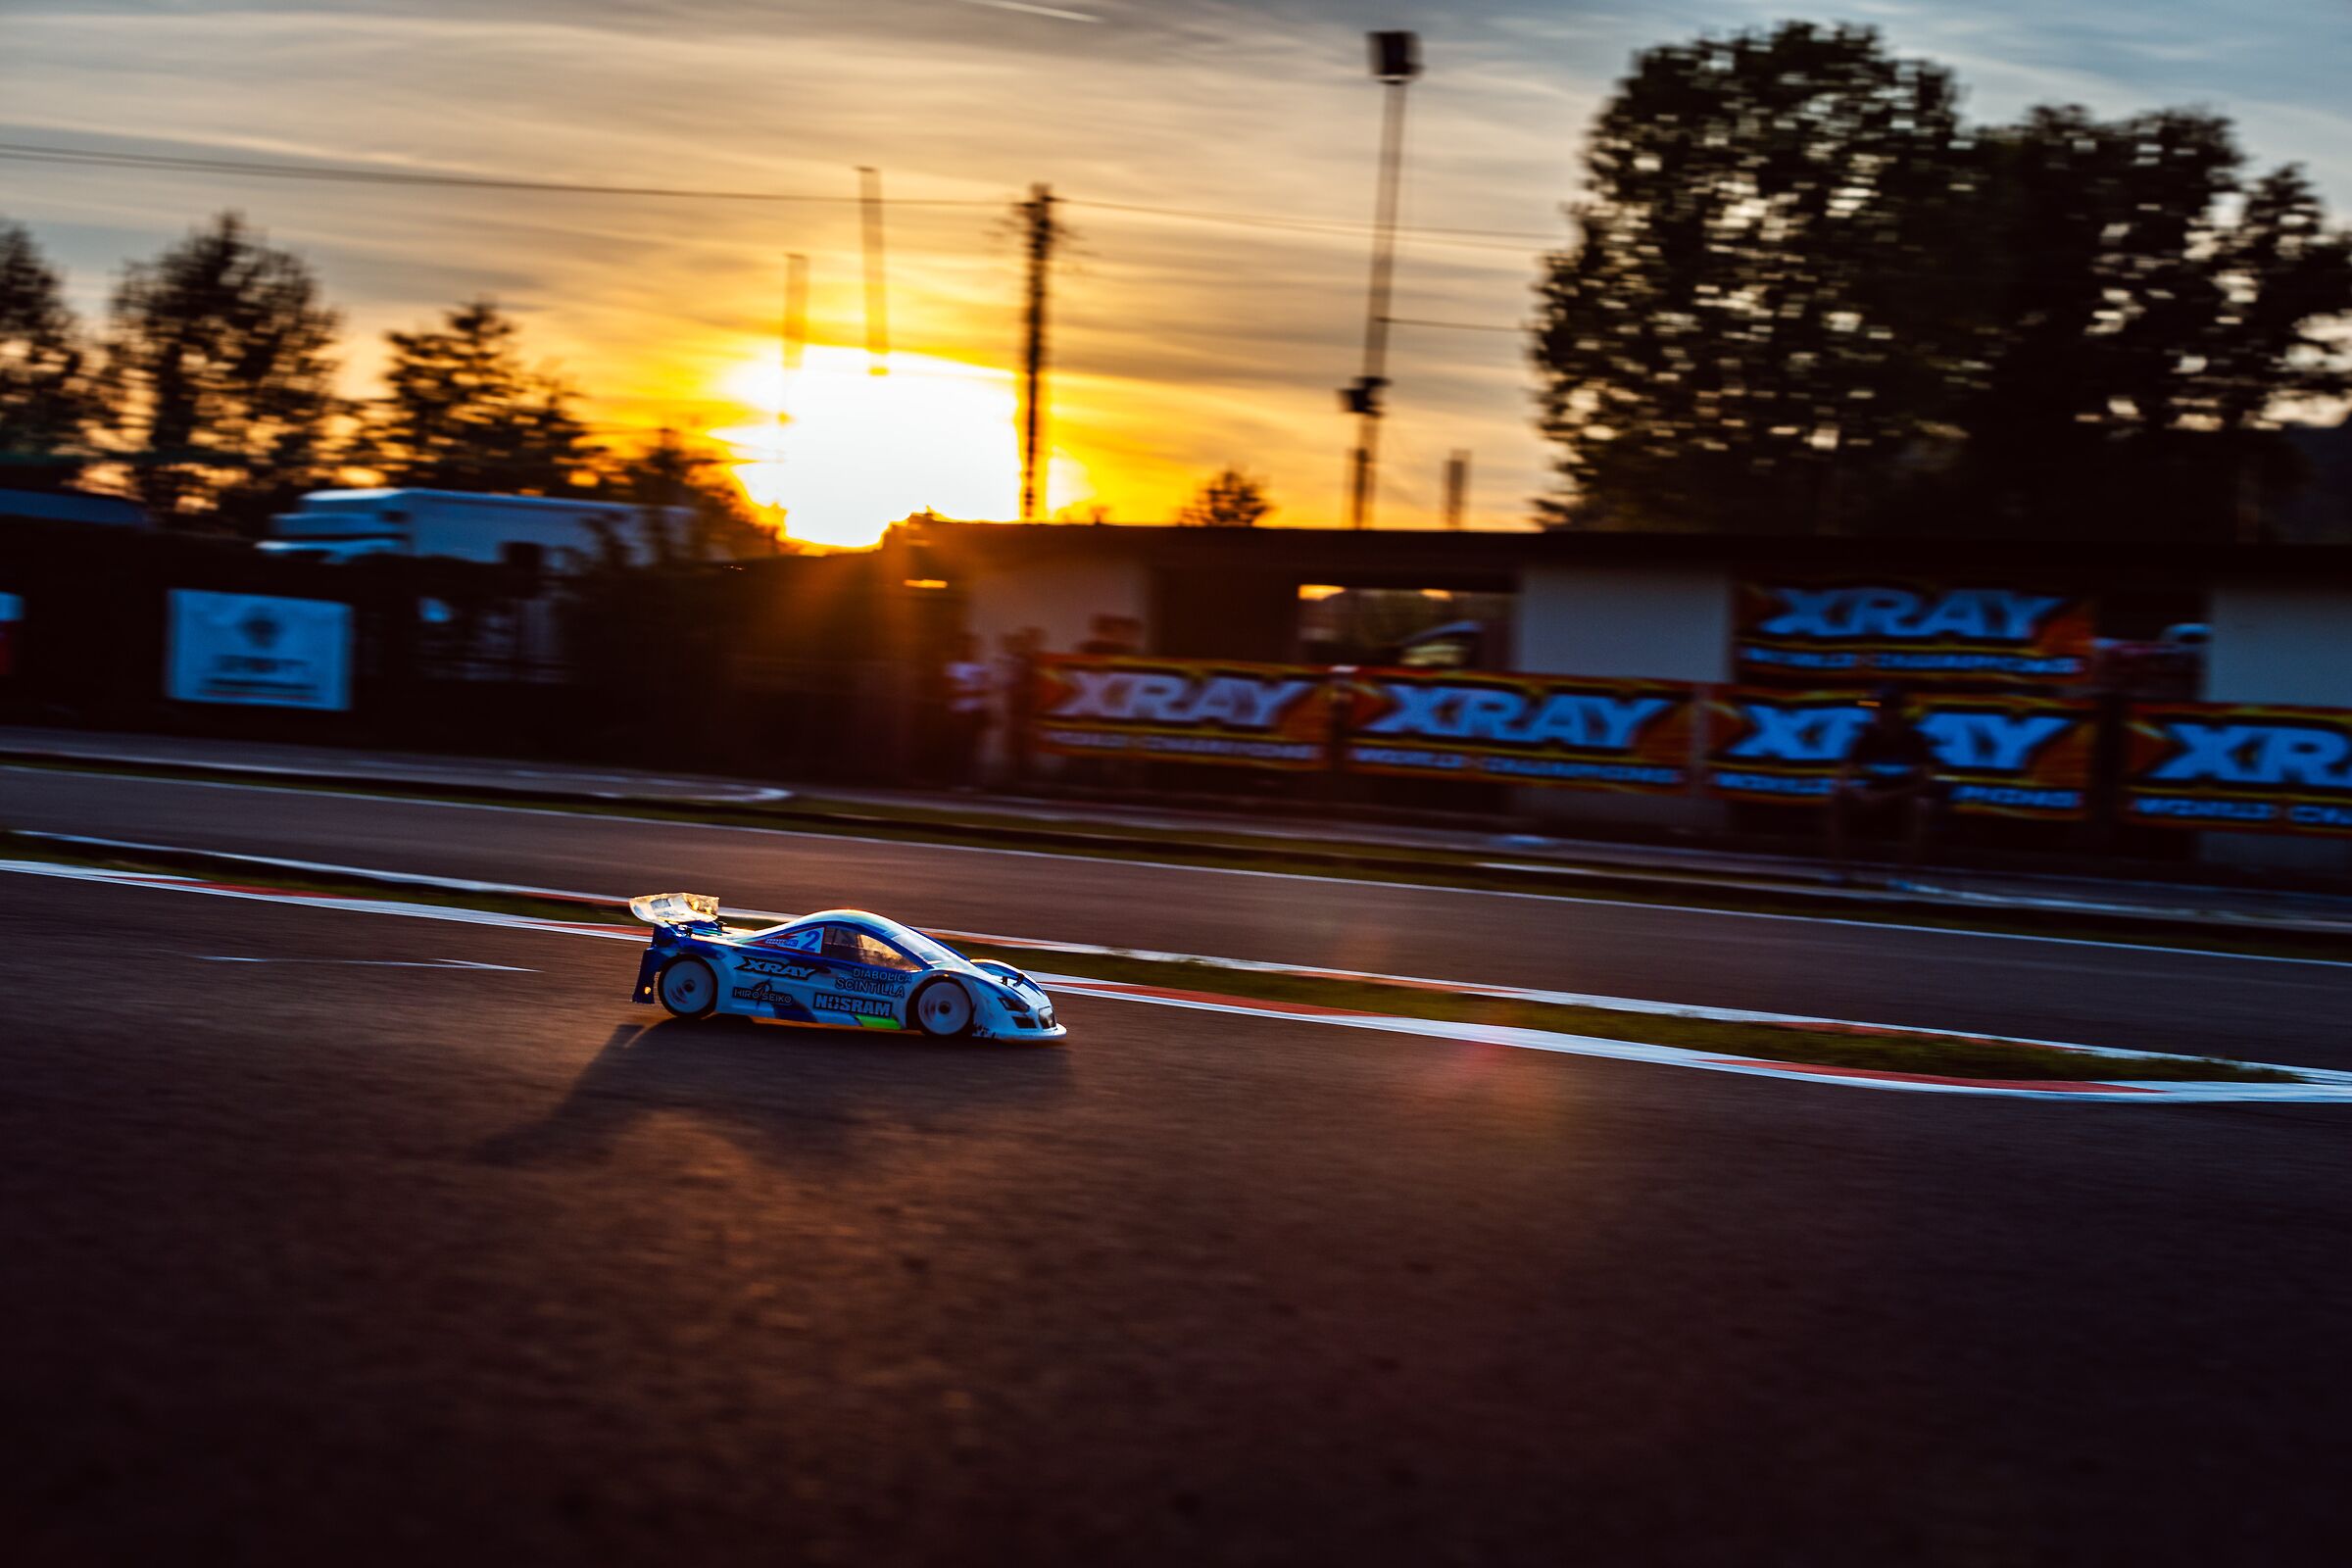 RC at sunset...